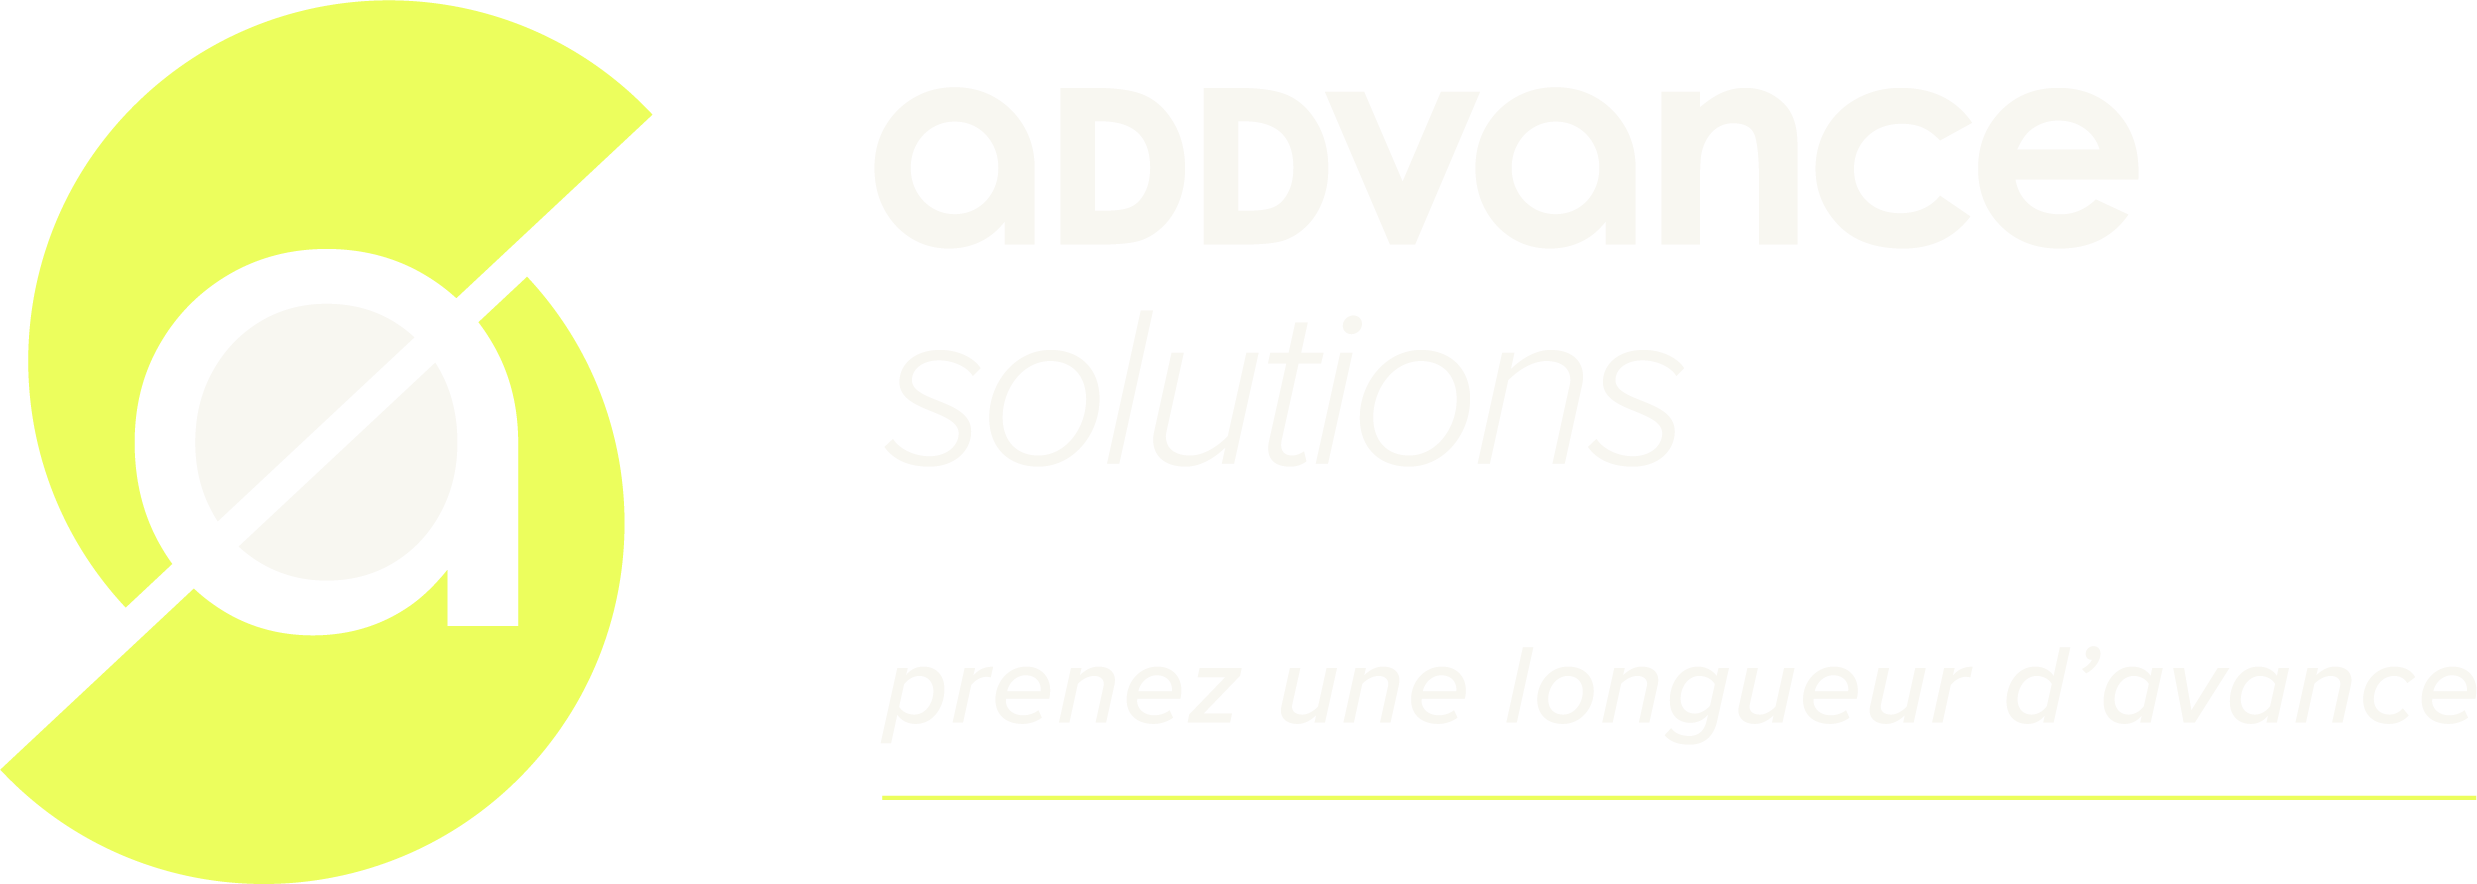 Addvance solutions